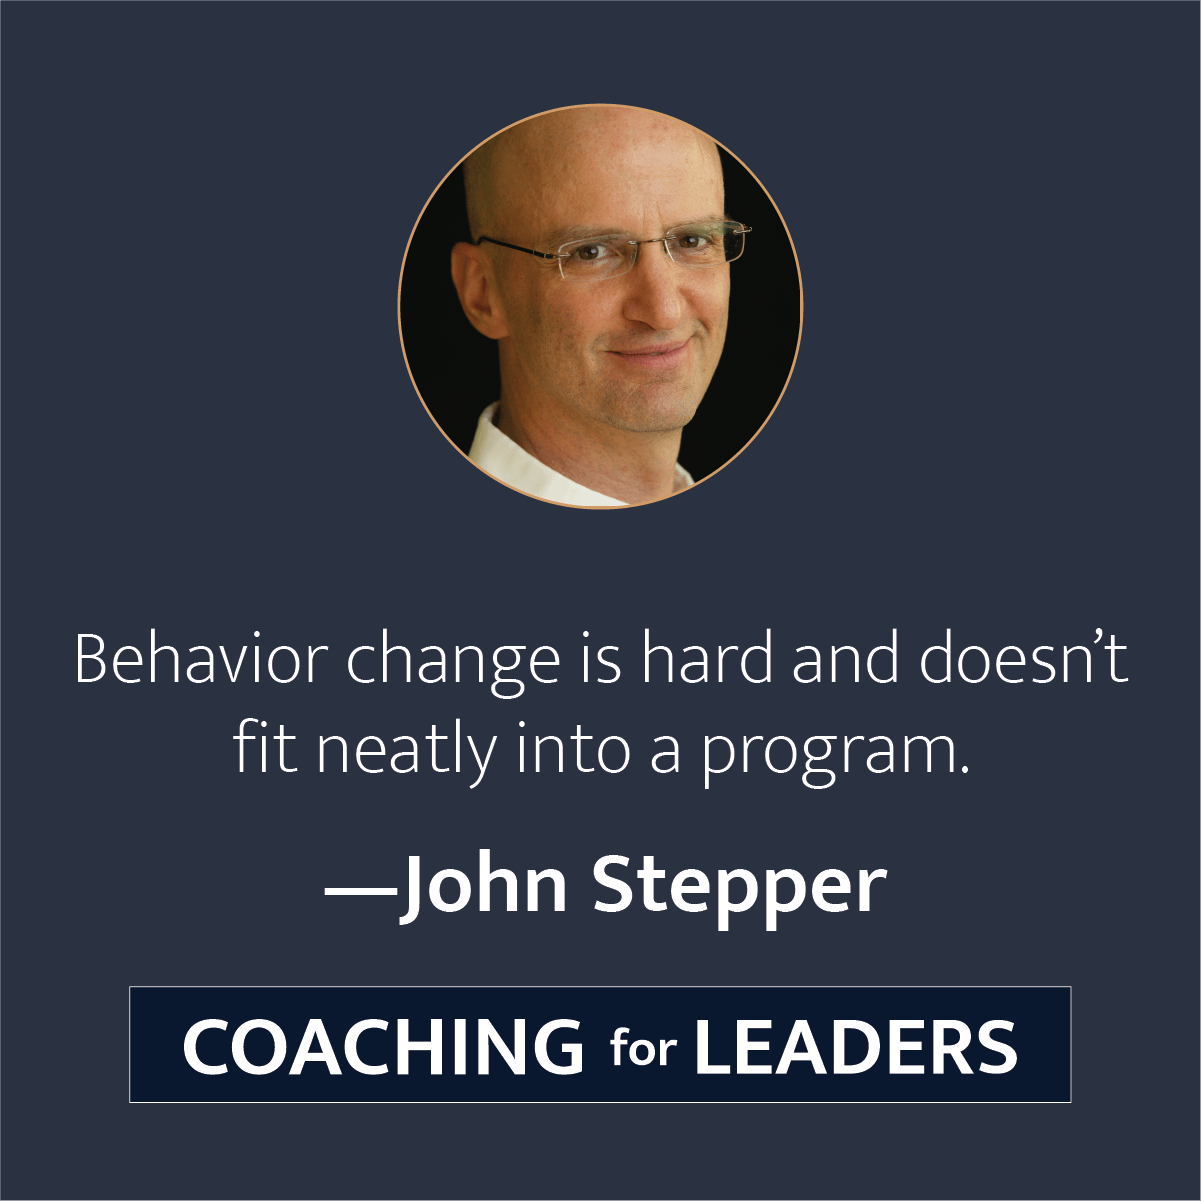 Behavior change is hard and doesn't fit neatly into a program.